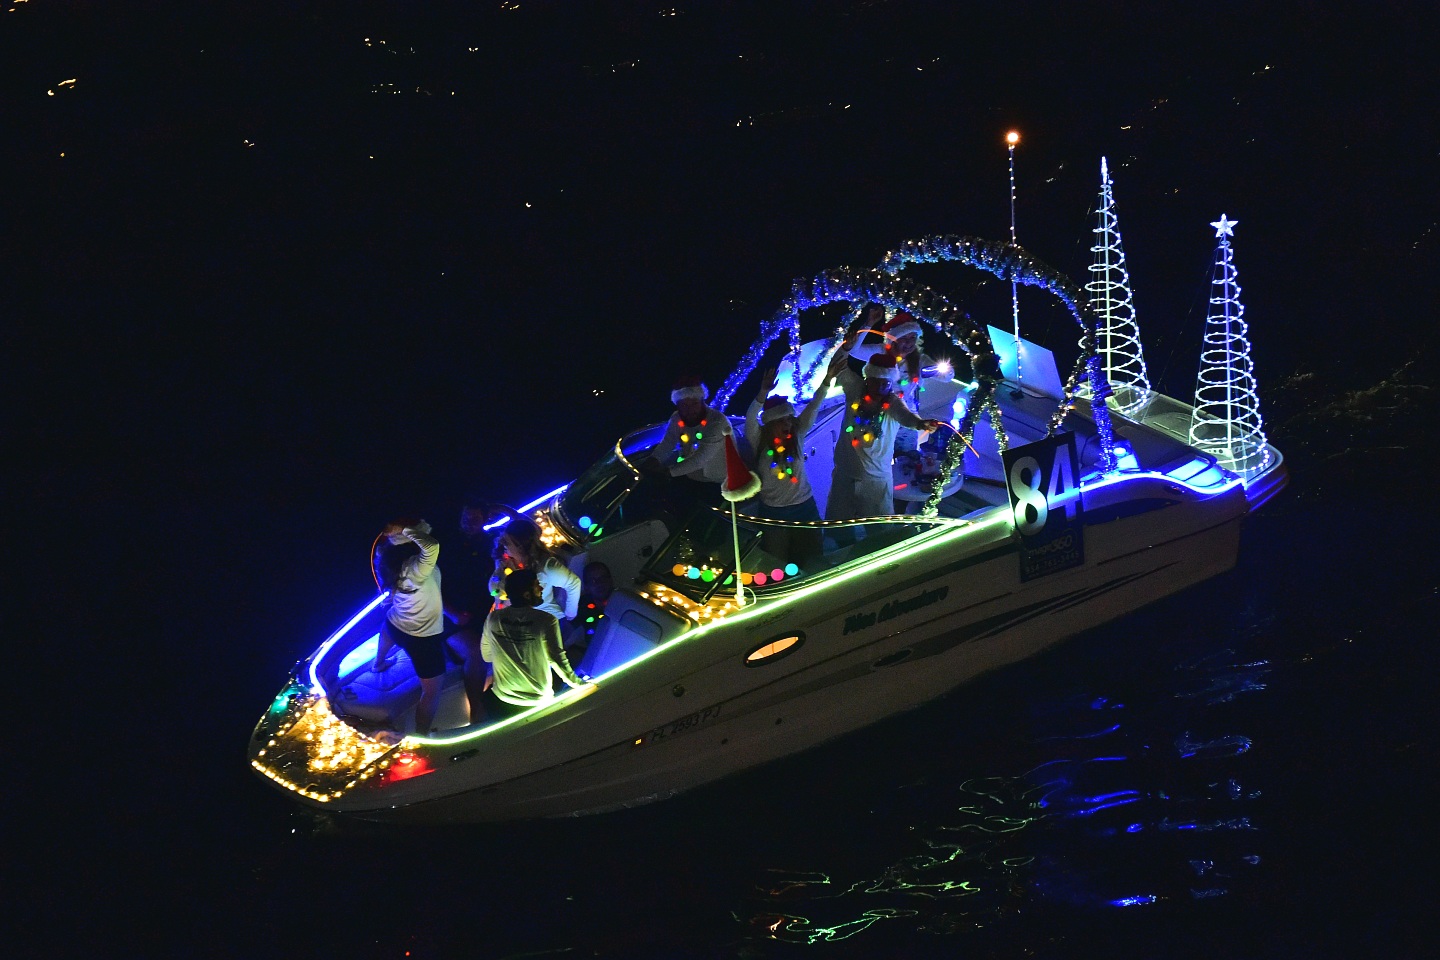 Miss Adventure, boat number 84 in the 2021 Winterfest Boat Parade